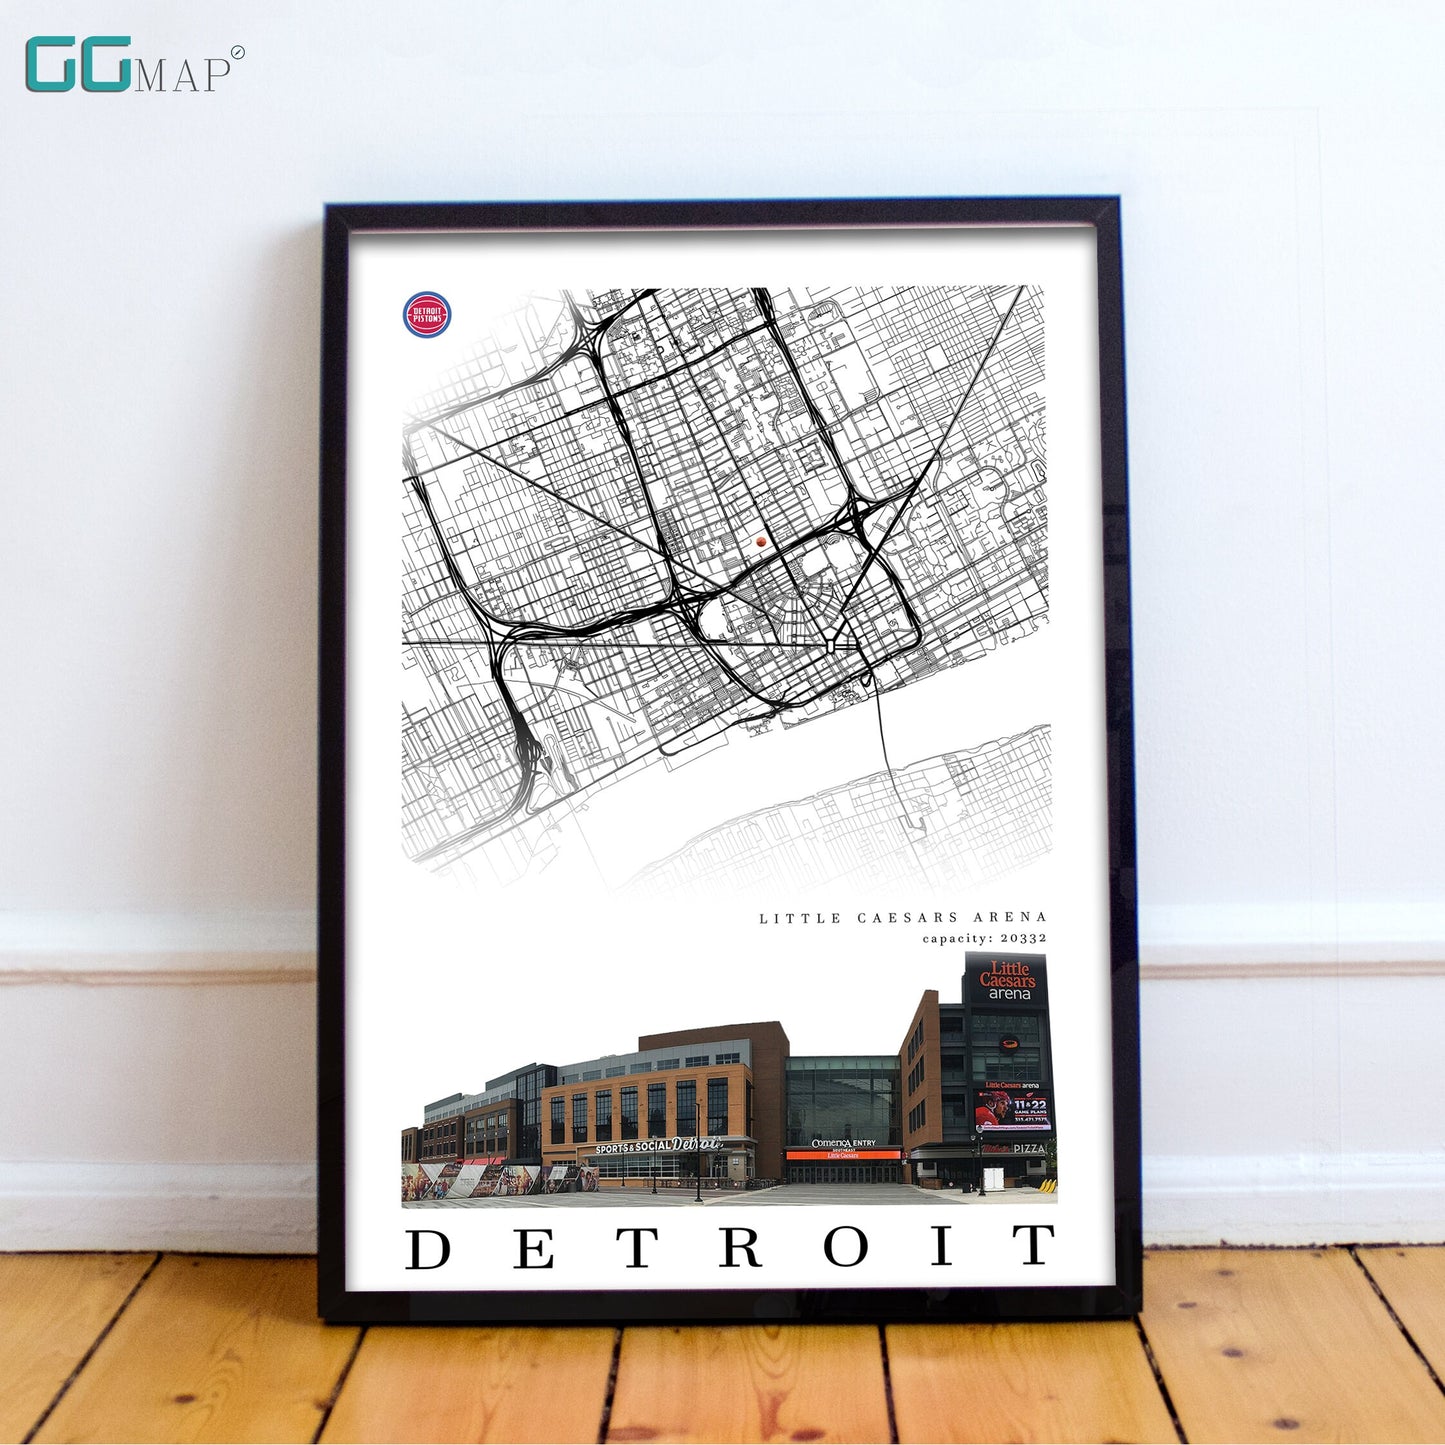 City map of DETROIT - Little Caesars Arena - Home Decor Detroit - Little Caesars Arena - Deroit poster - Detroit gift - Print map